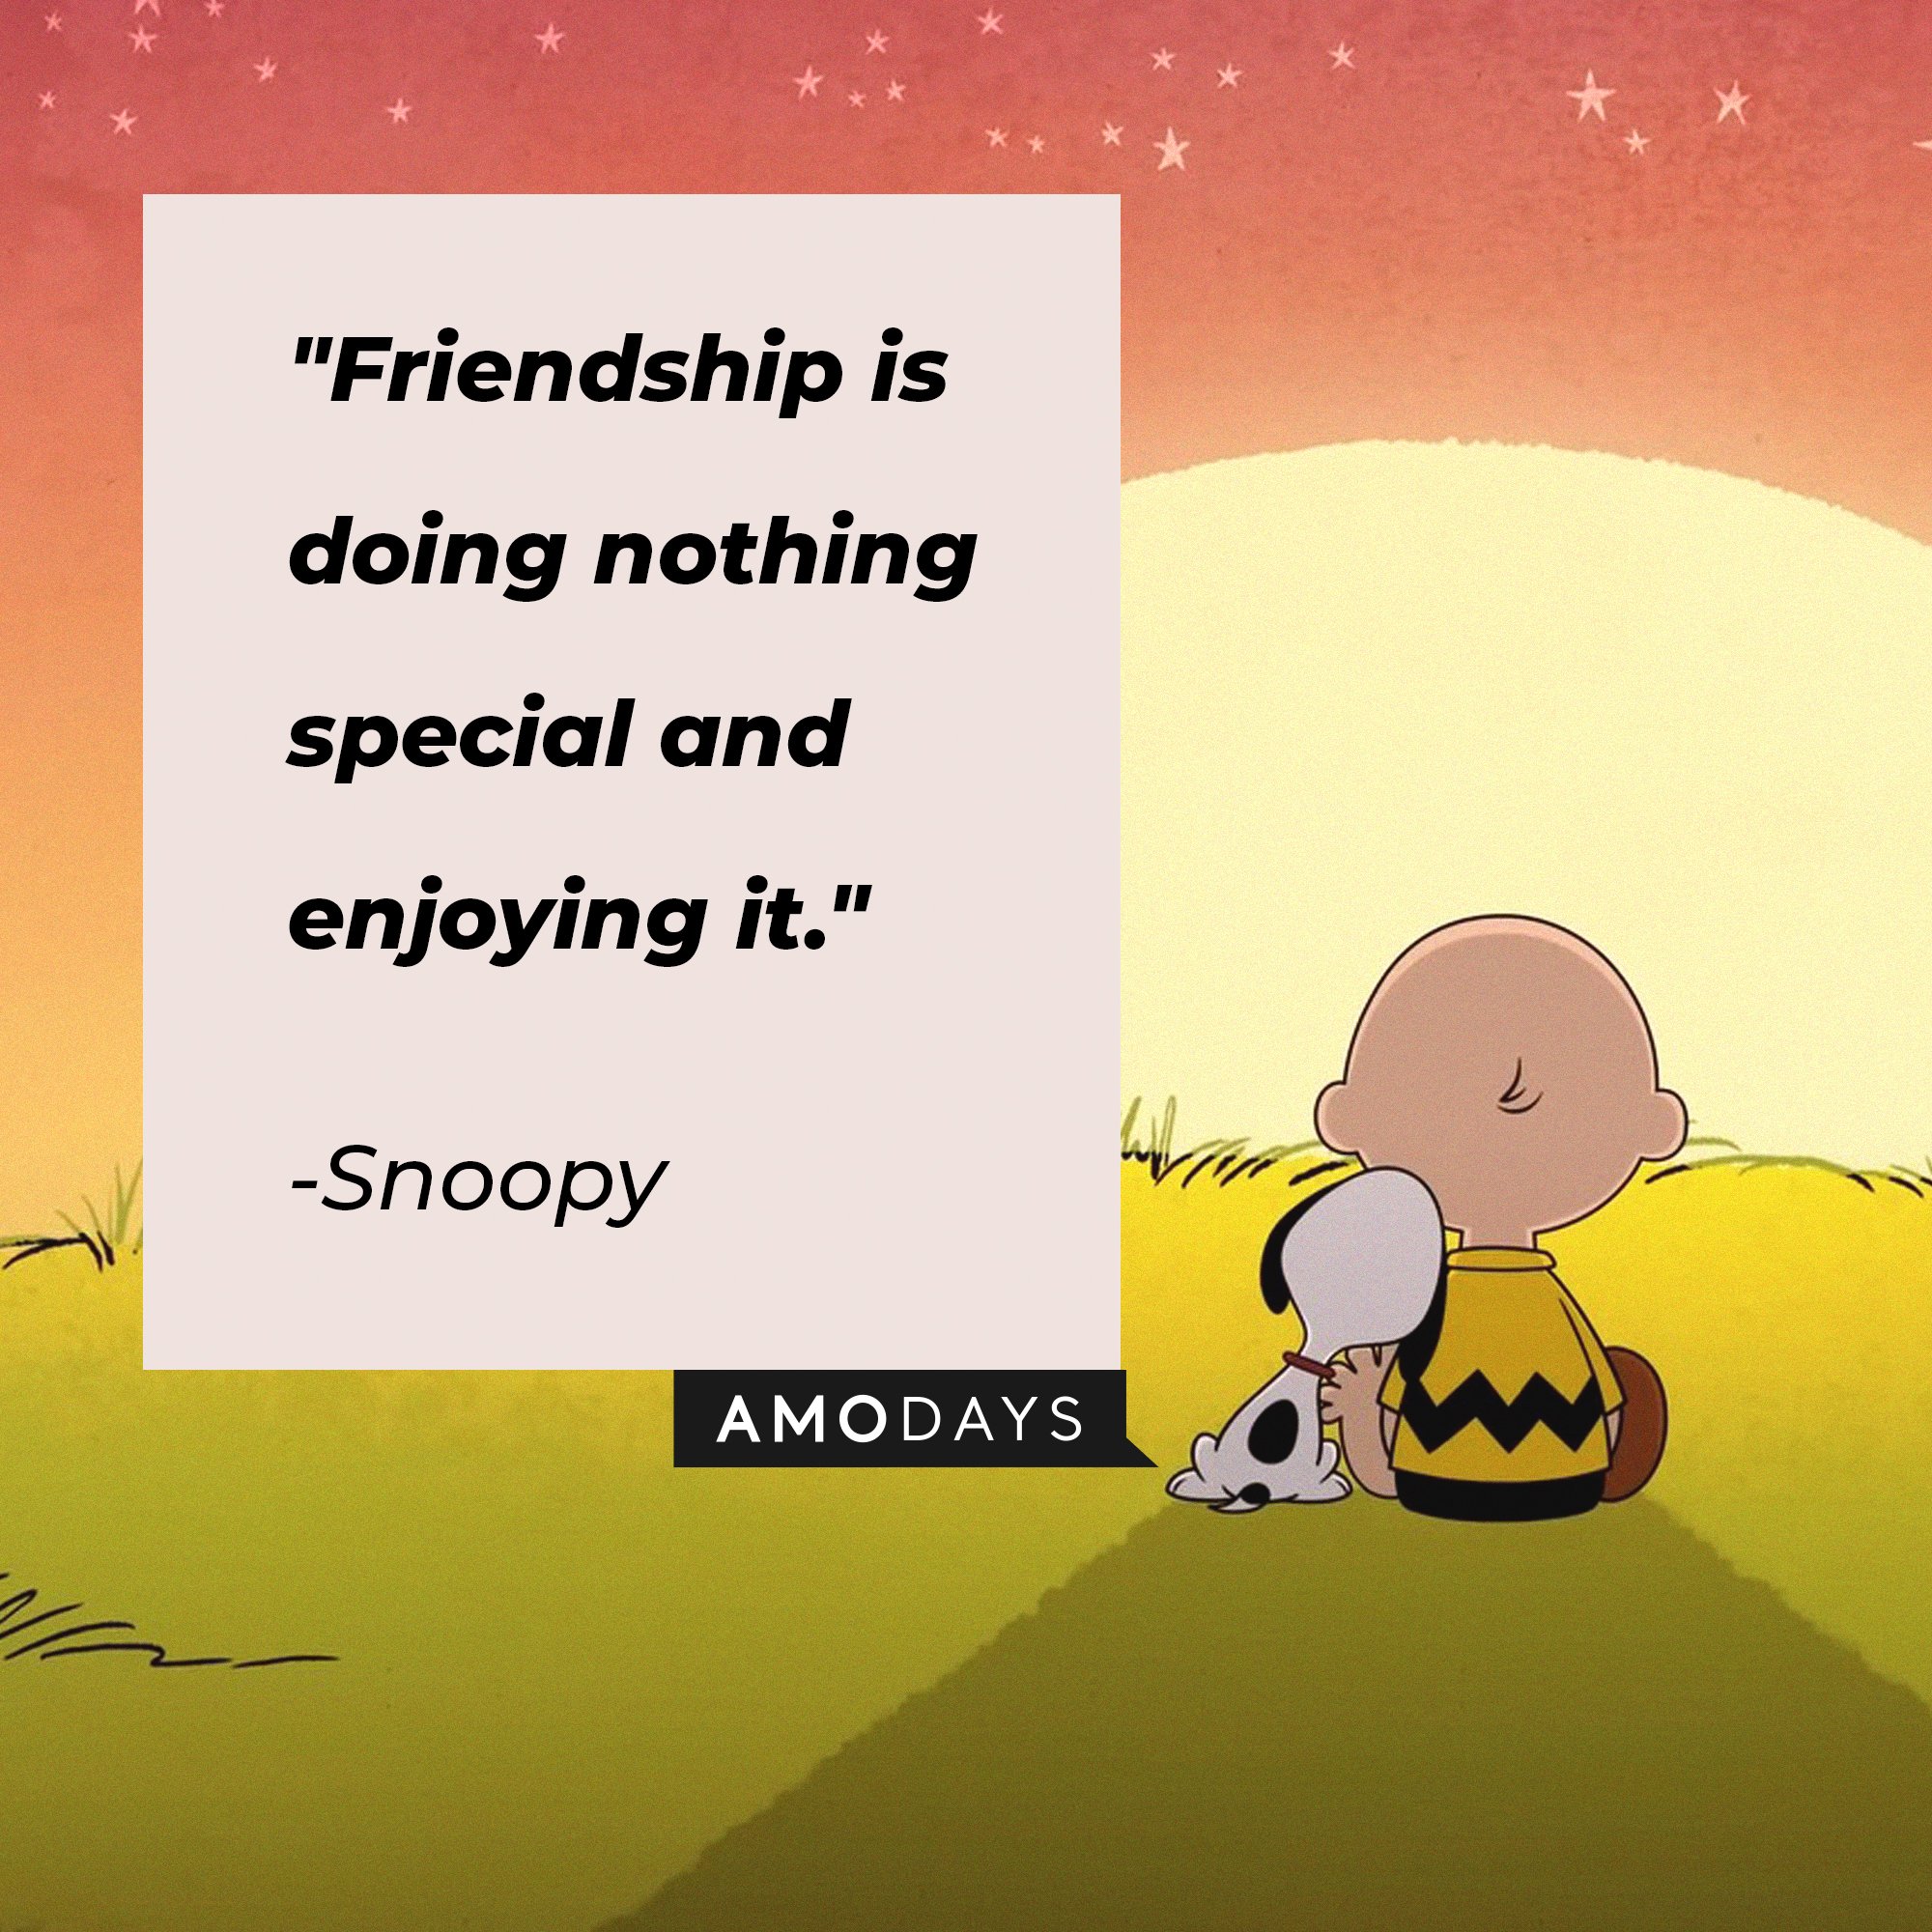 Snoopy’s quote: "Friendship is doing nothing special and enjoying it." | Image: AmoDays 